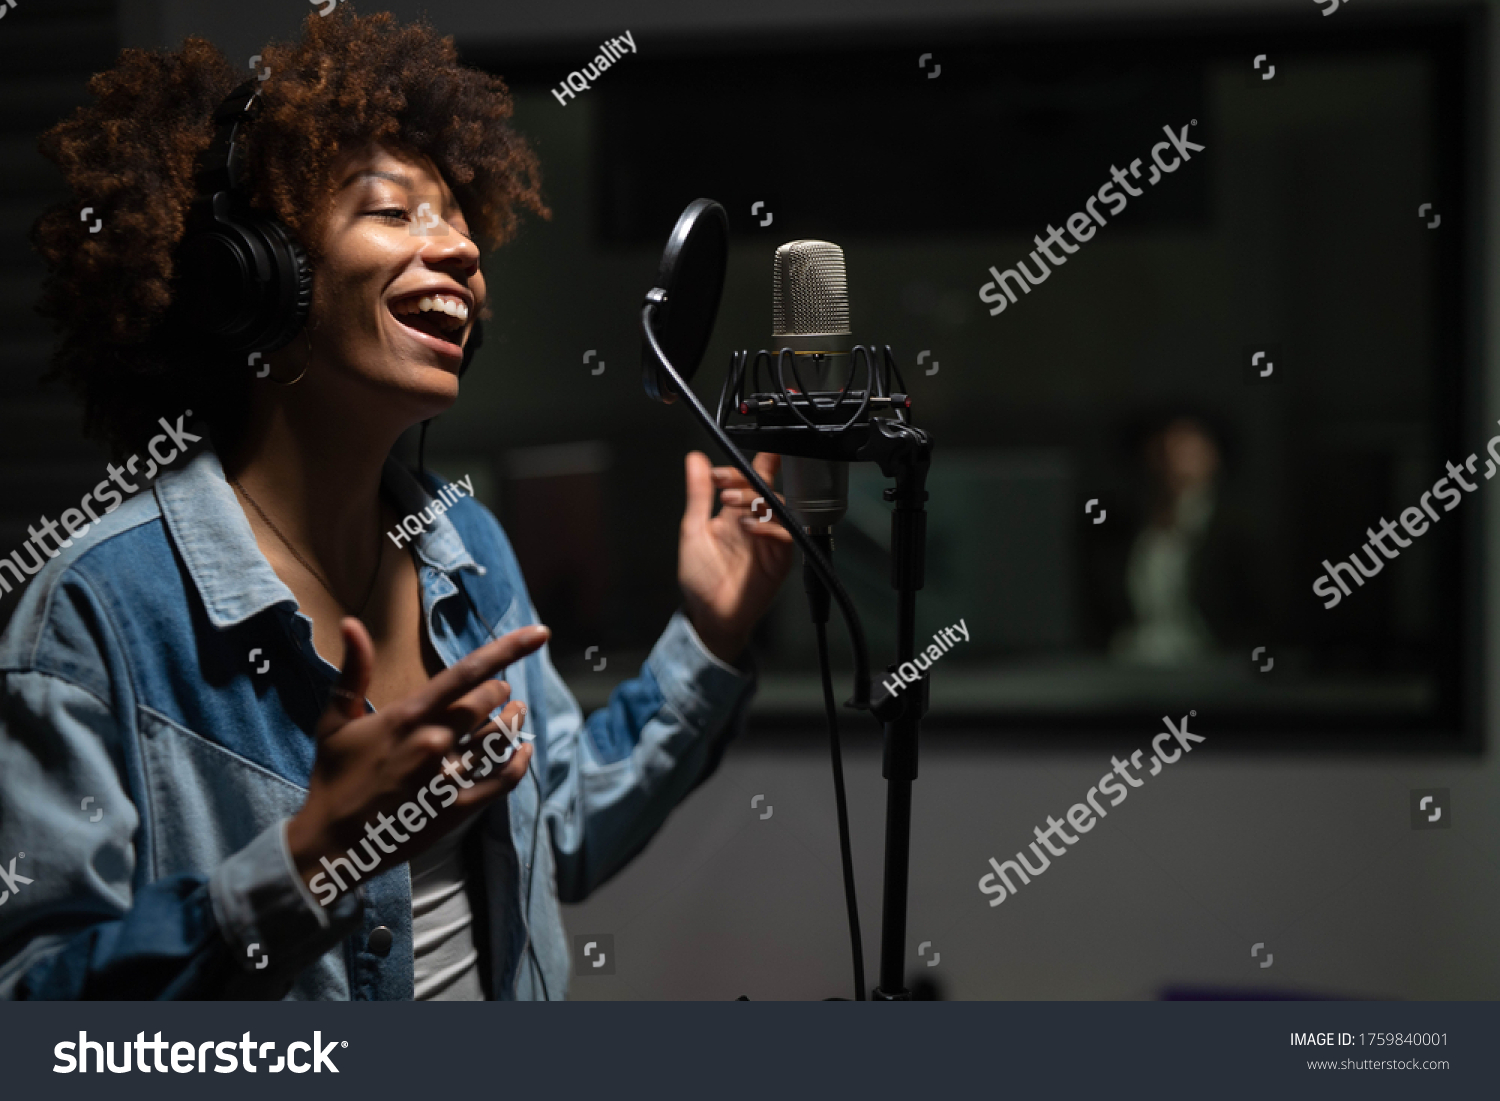 An young professional smiling energetic african female singer wearing headphones is performing a new song with a microphone while recording it in a music studio.  #1759840001